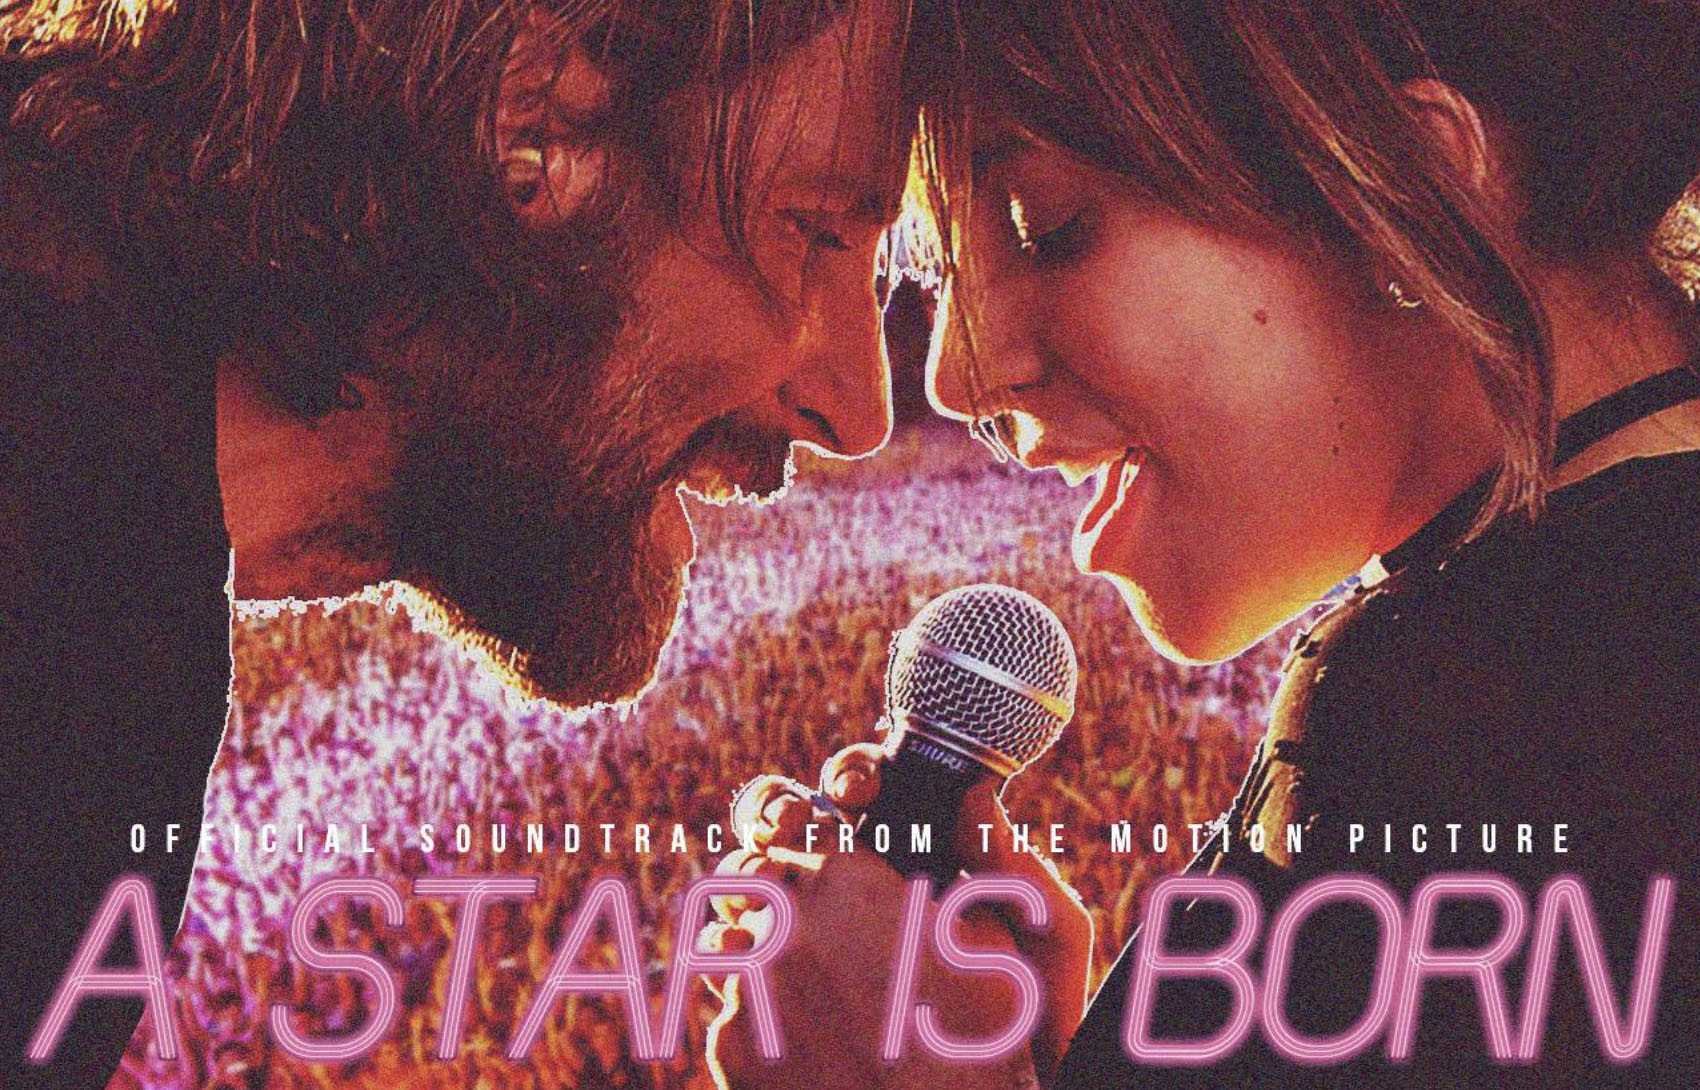 a star is born ost download torrent